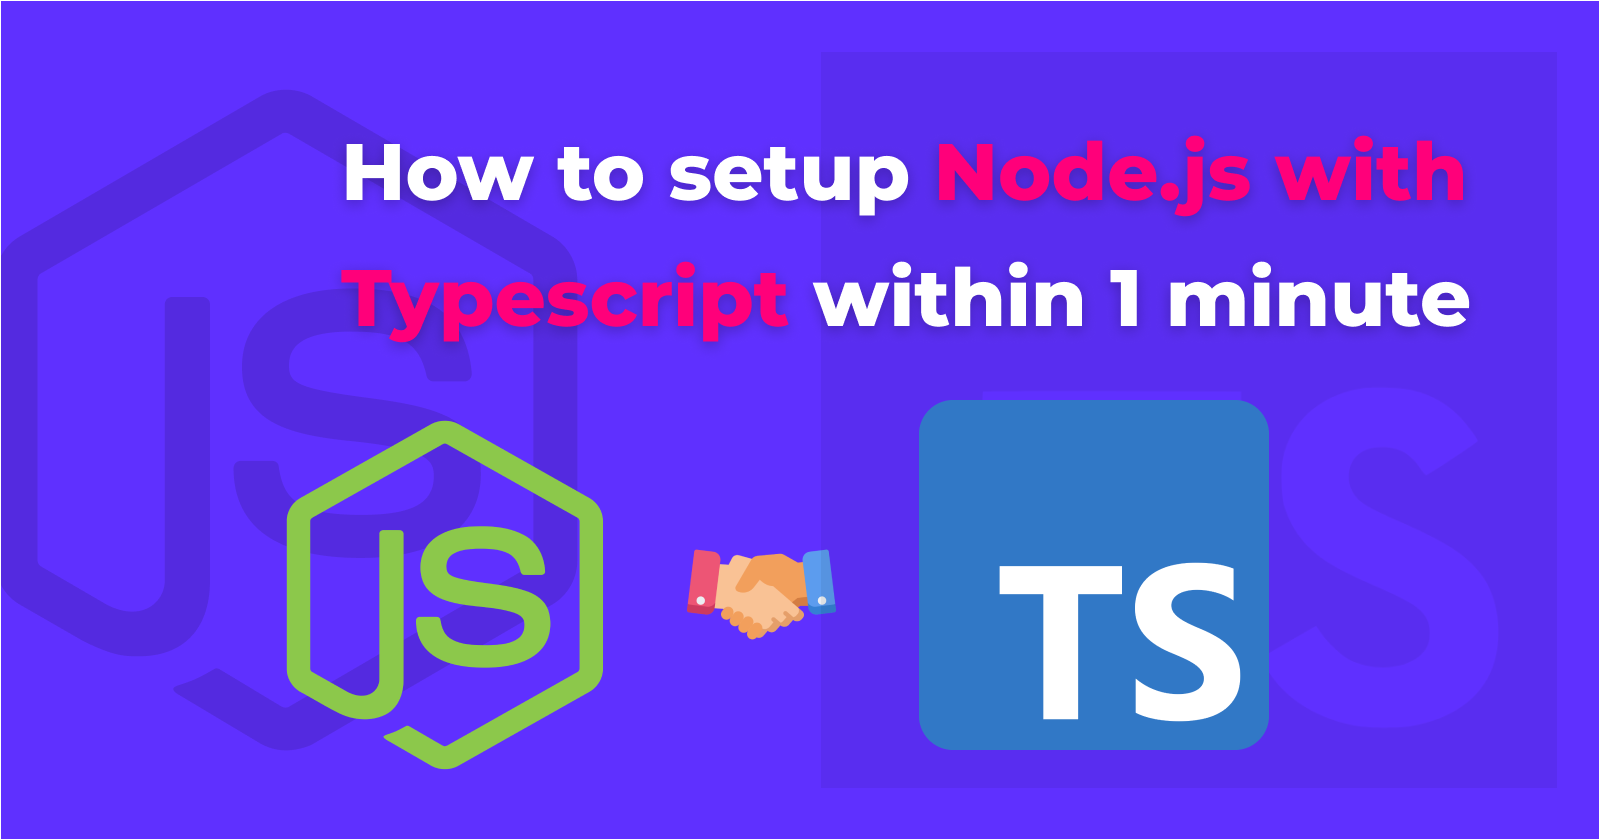 How to setup Node.js with Typescript within 1 minute